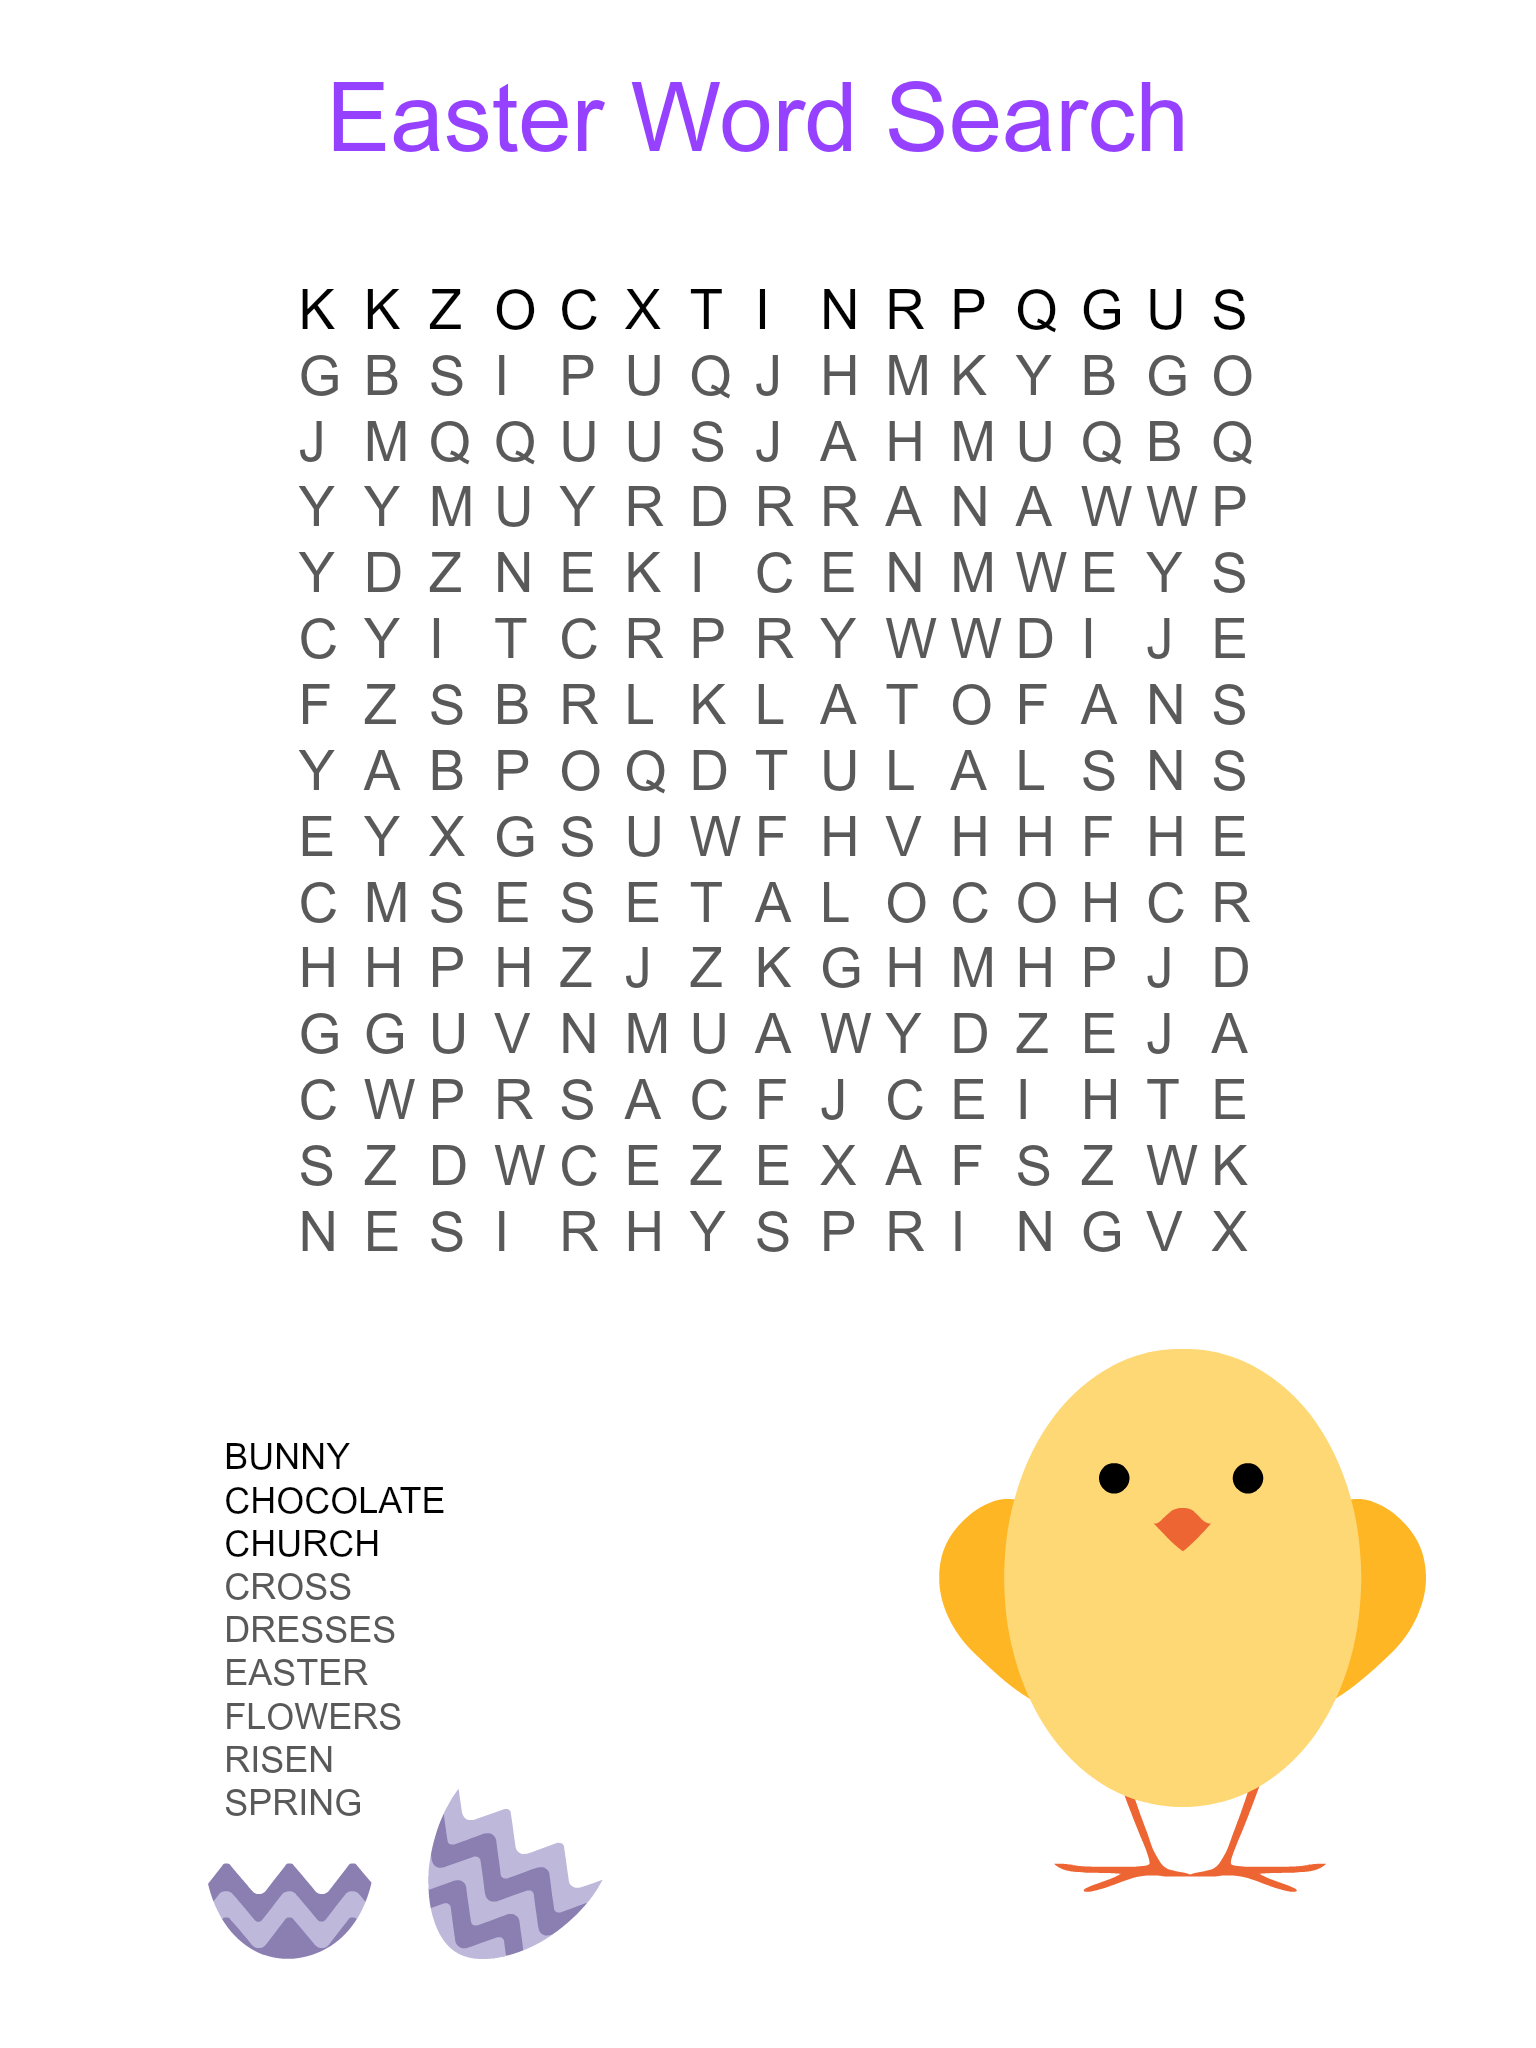 Easter Word Search PuzzleLots of Easter Time fun for the kids